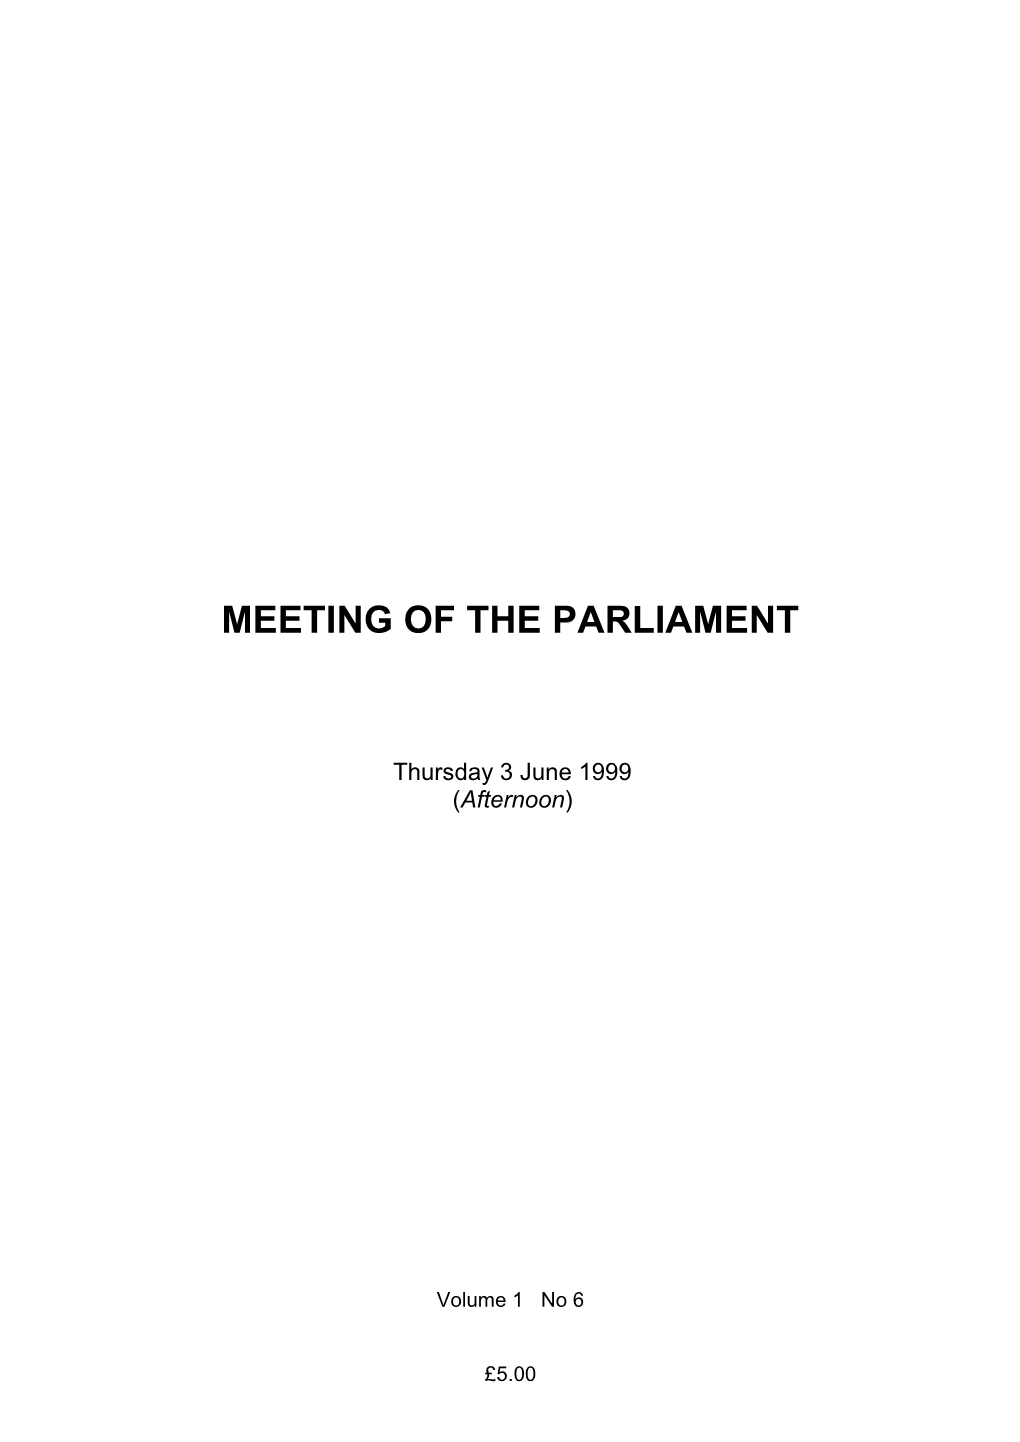 Meeting of the Parliament